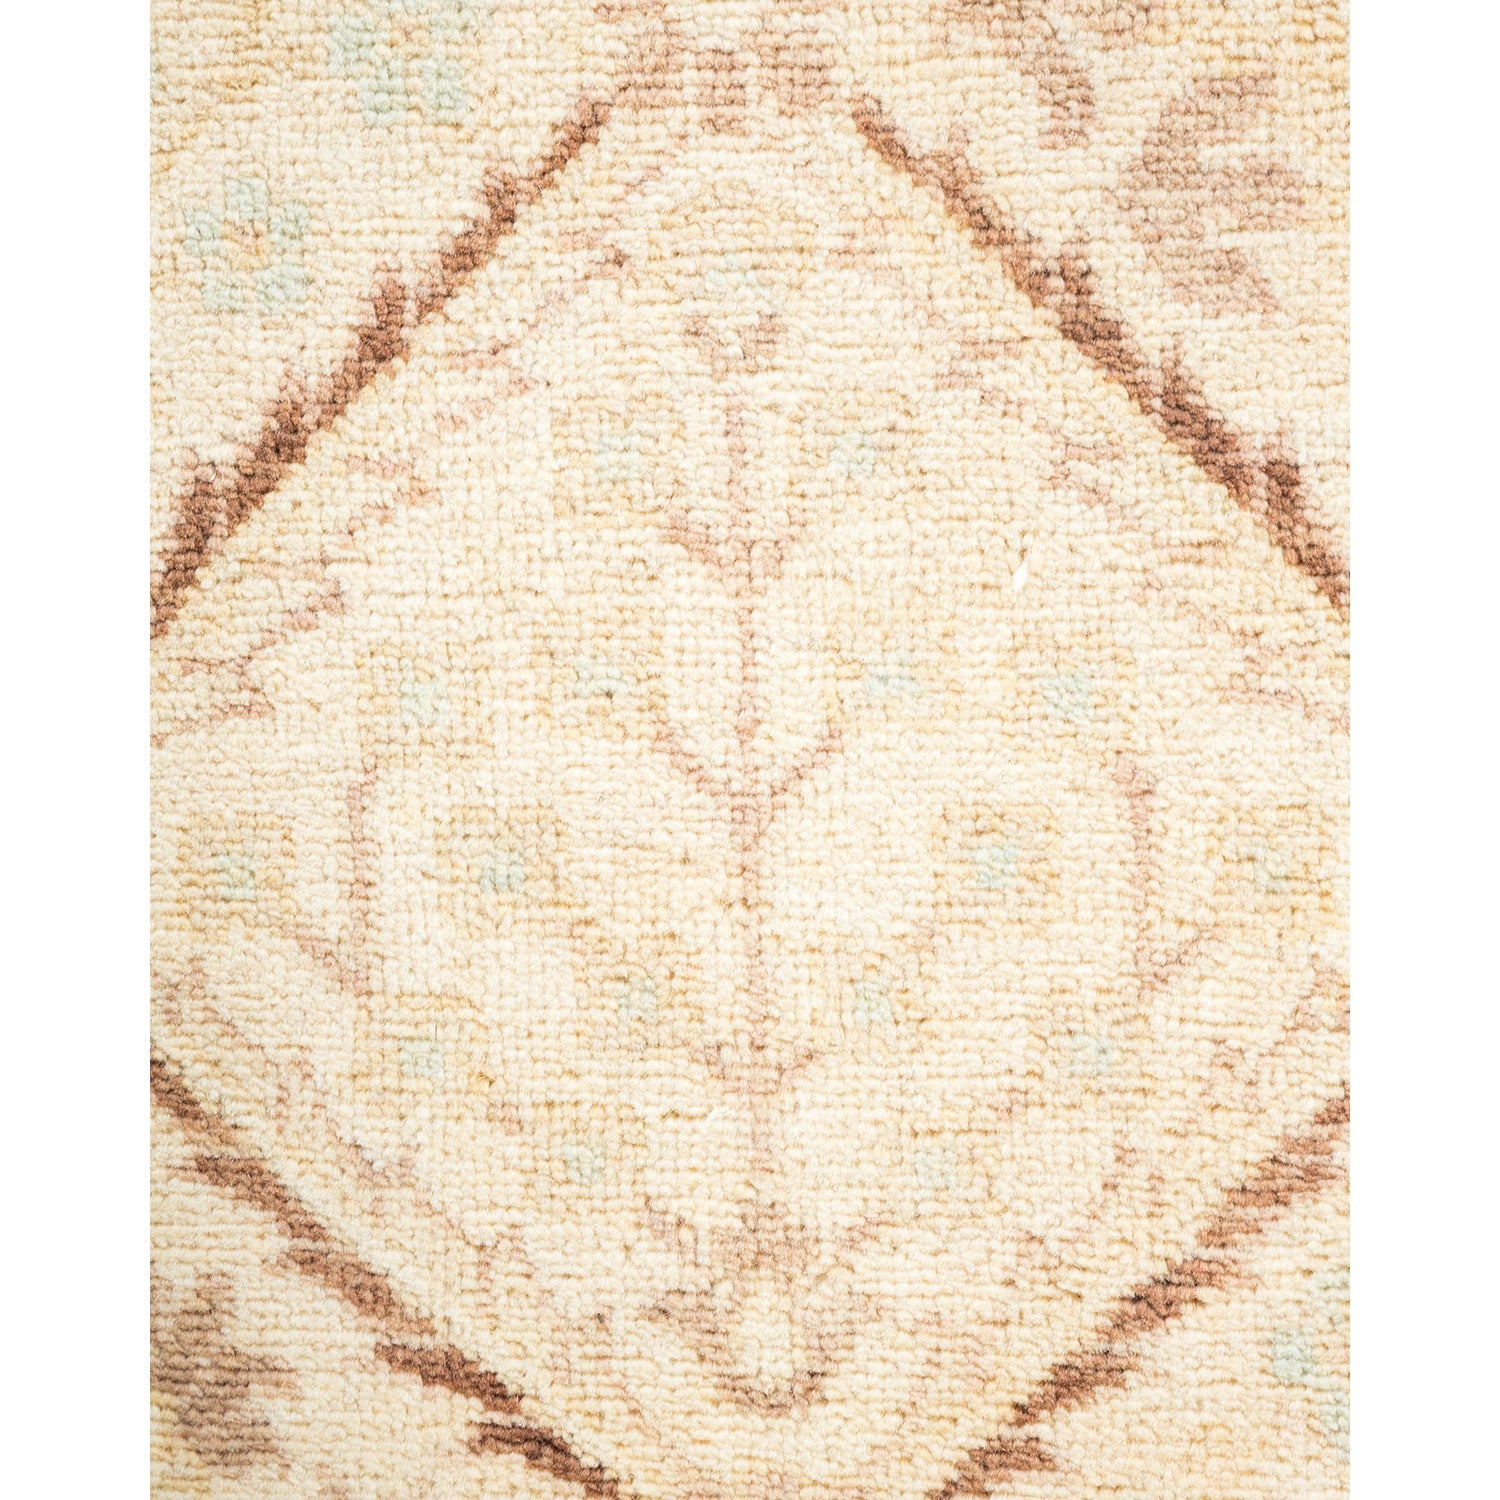 Close-up of a soft and ornate rug with neutral tones.